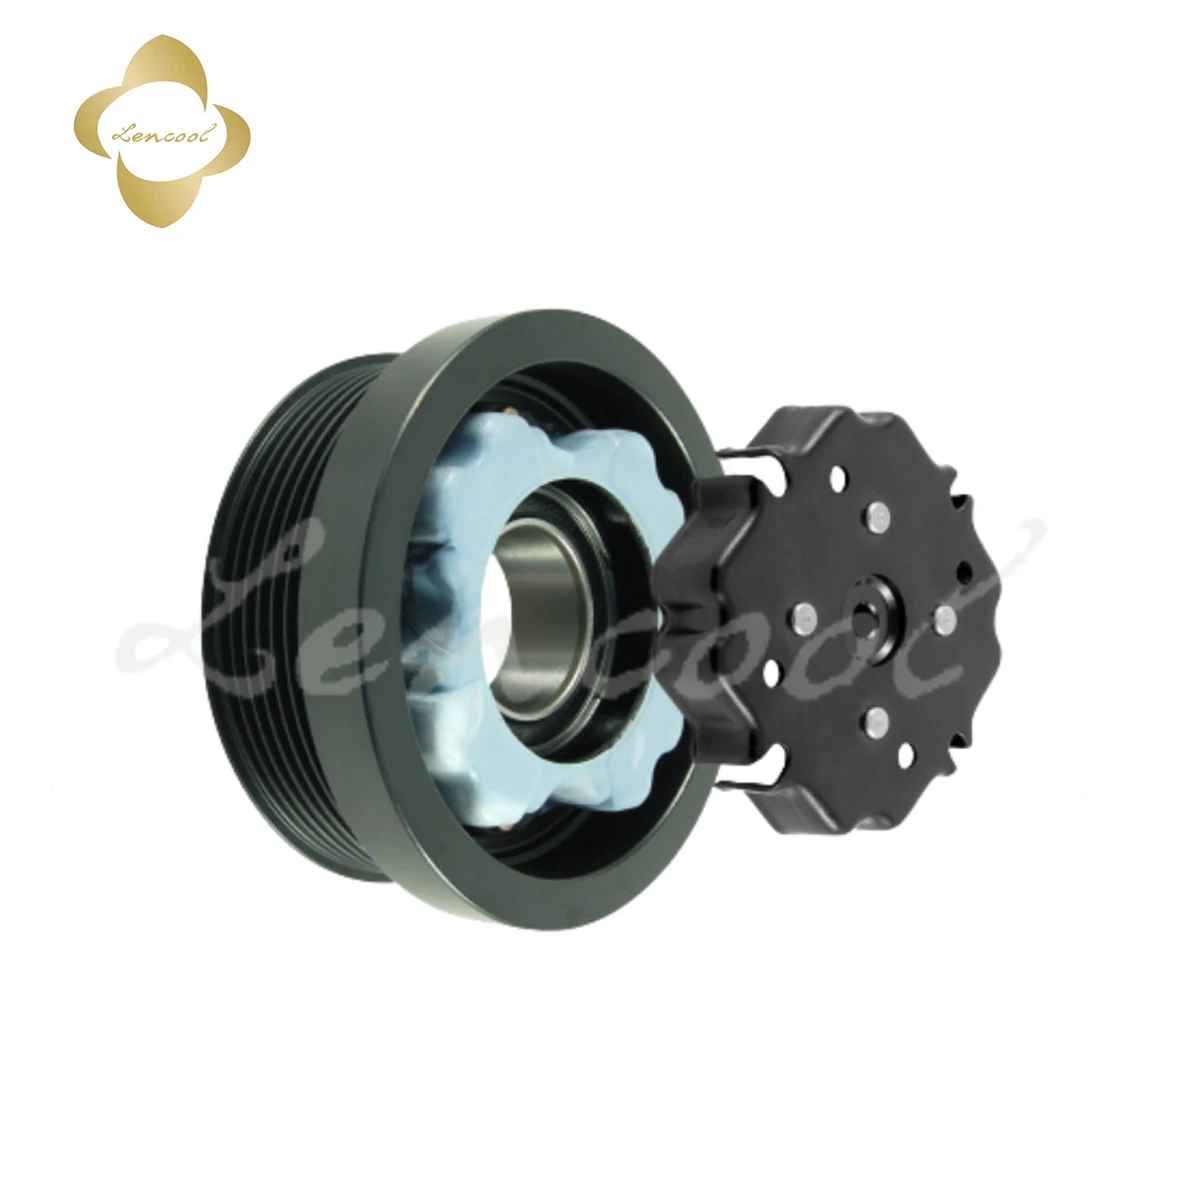 

AC A/C Air Conditioning Compressor Clutch Pulley For MERCEDES S600 S65AMG W220 CL600 65AMG C215 MAZDA OPEL 0002307211 0002308611